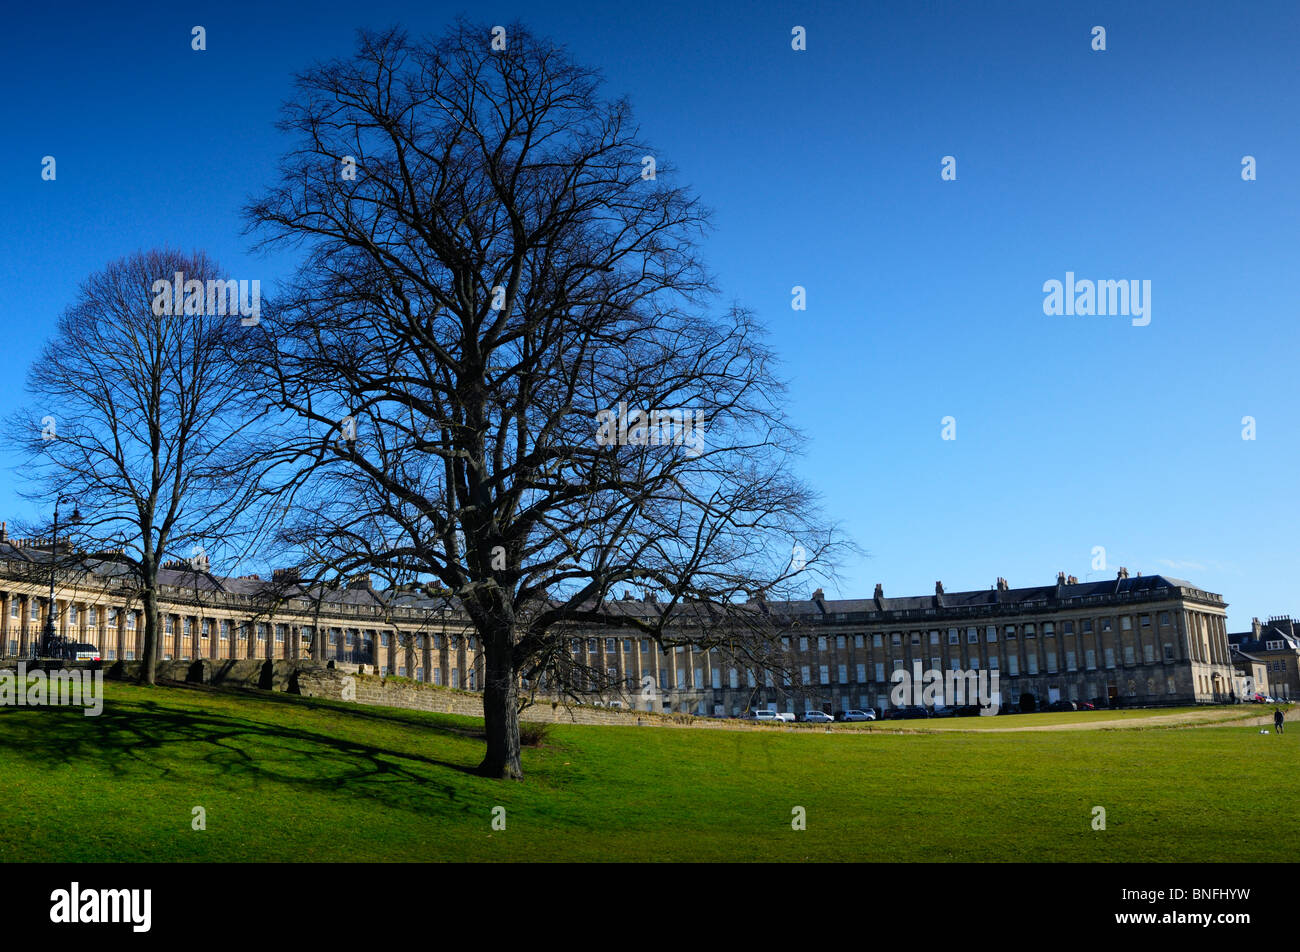 The 'Royal Crescent' in the historic, planned Georgian city of Bath in the UK on a Sunny day with open lawns and a tree in front Stock Photo